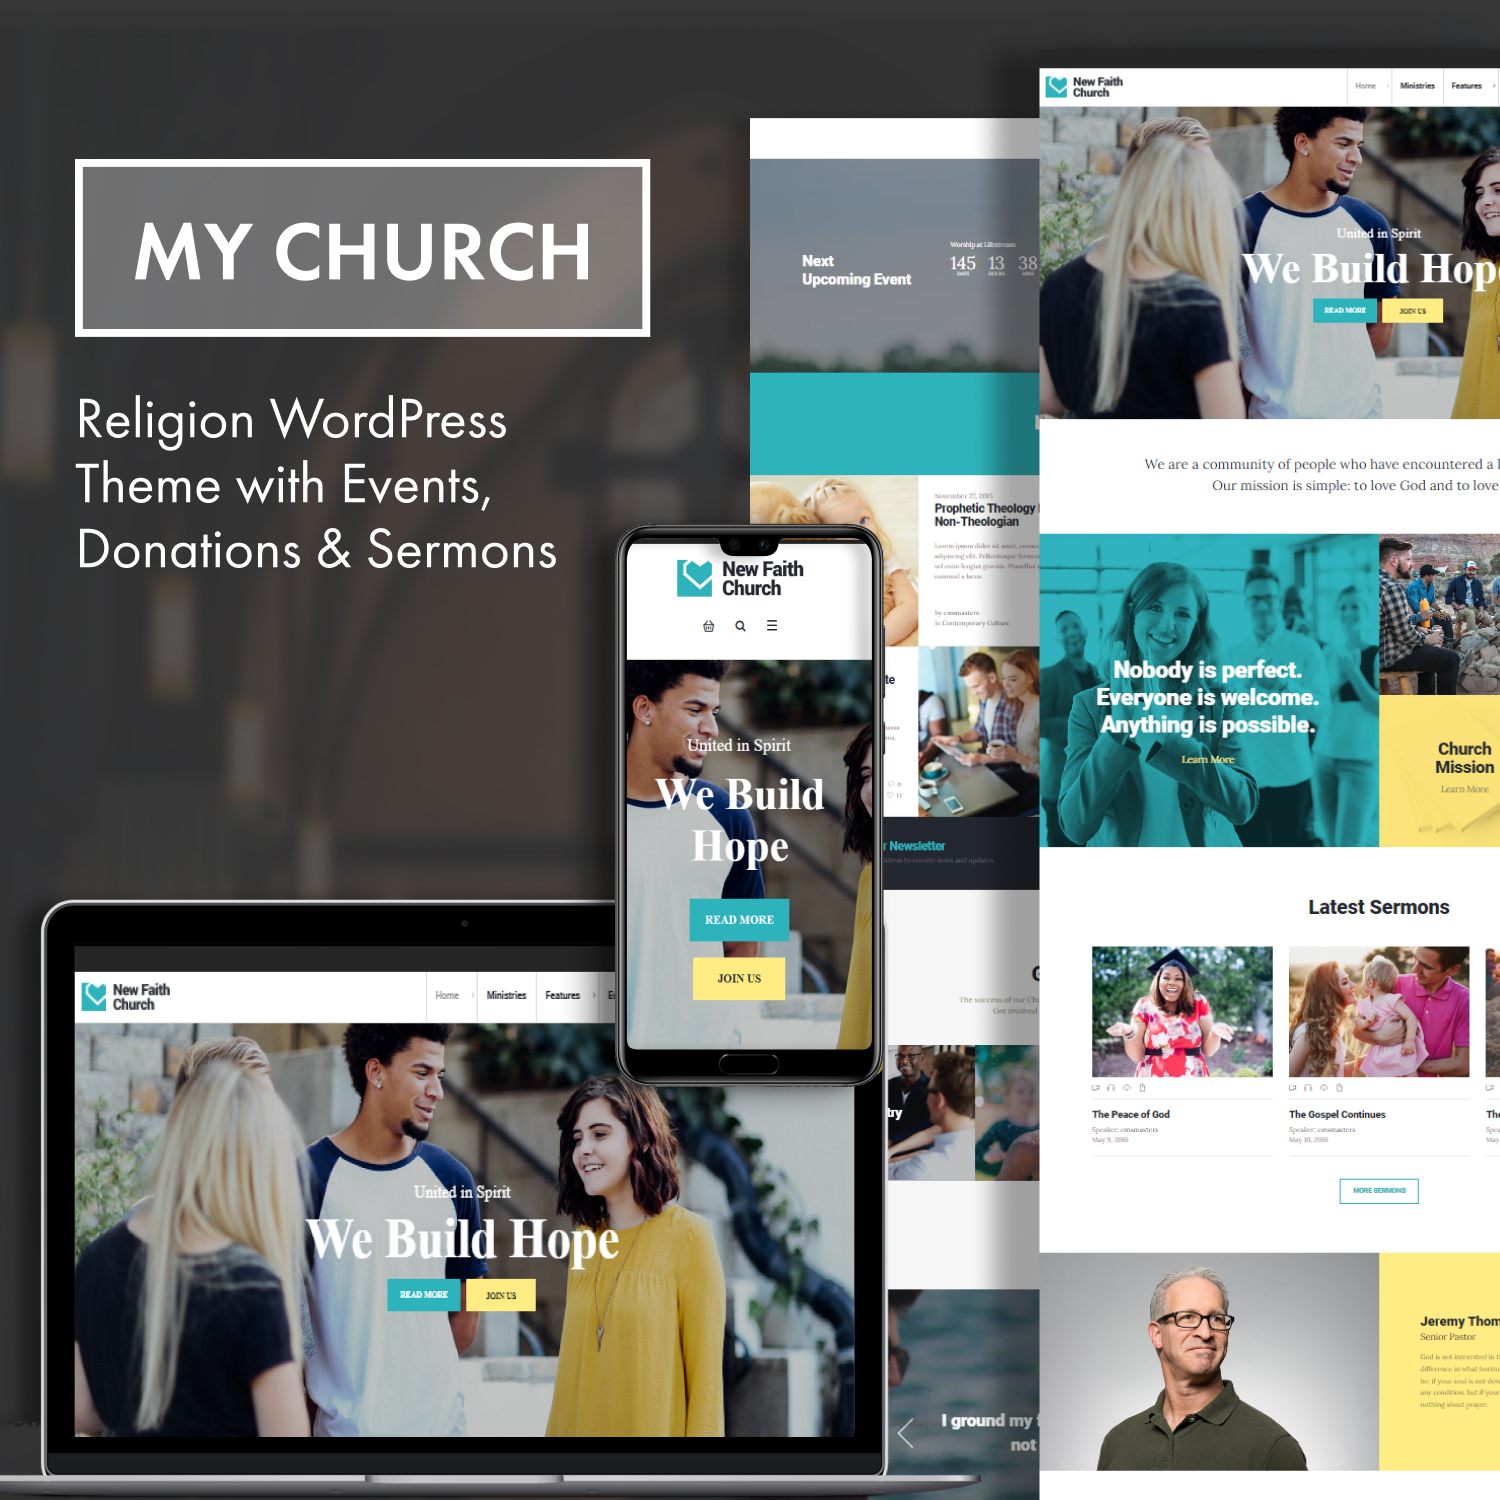 Preview my church religion wordpress theme with events donations sermons.